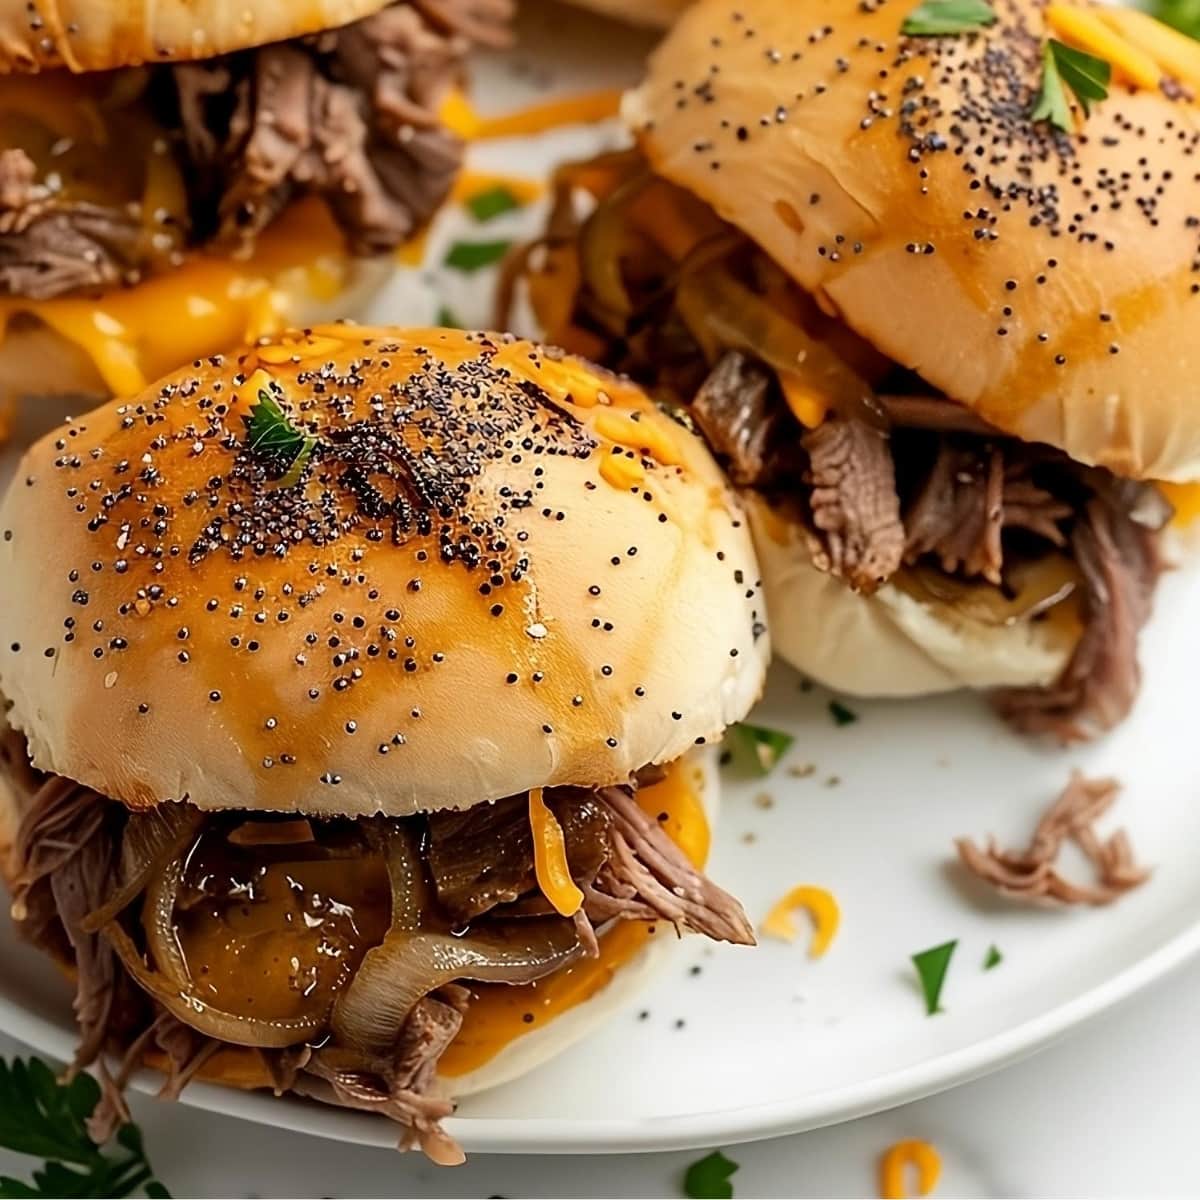 Cheese and beef sliders in a plate with poppy seeds butter on top.